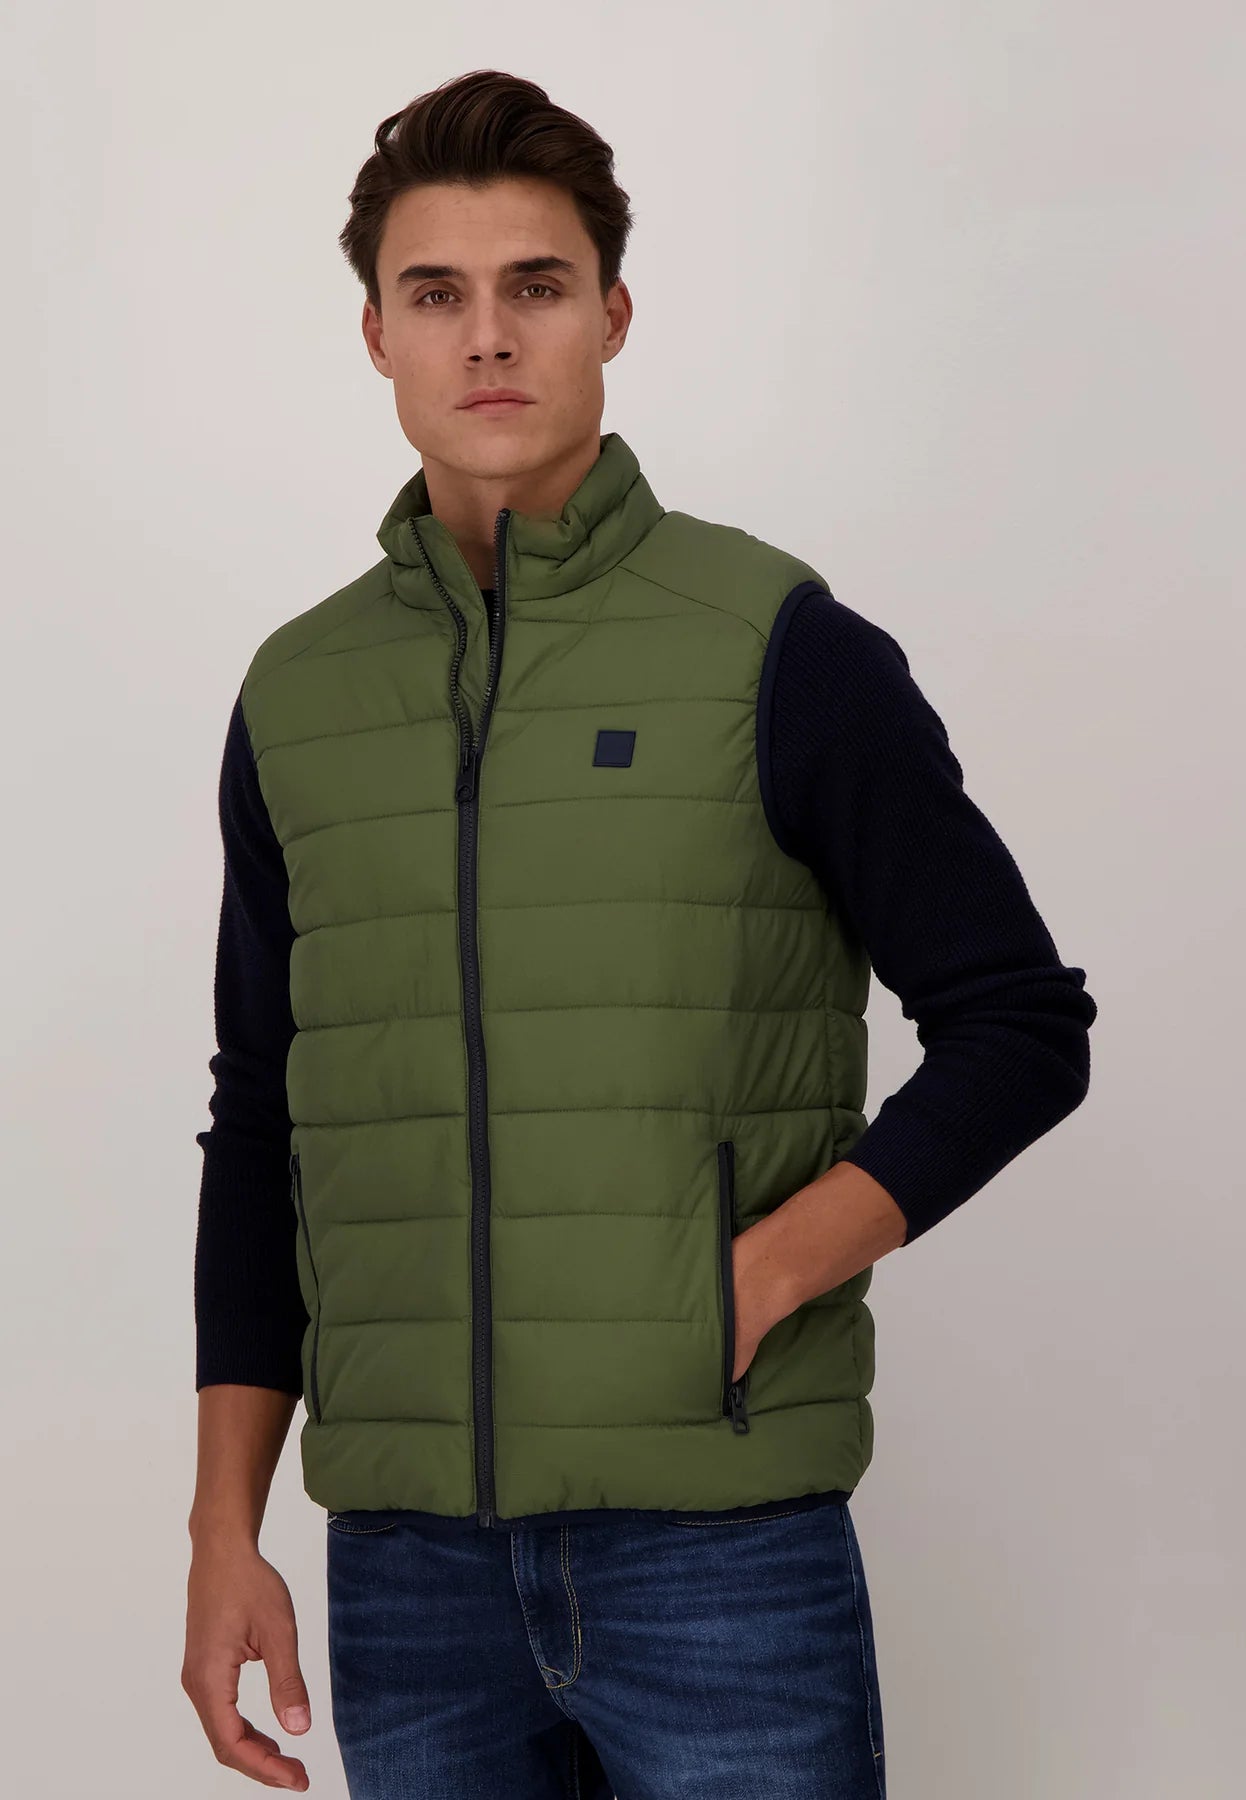 A Model Wearing Fynch-Hatton Quilted Top Padded Gilet Olive Green Front side view with Hand in his Pocket